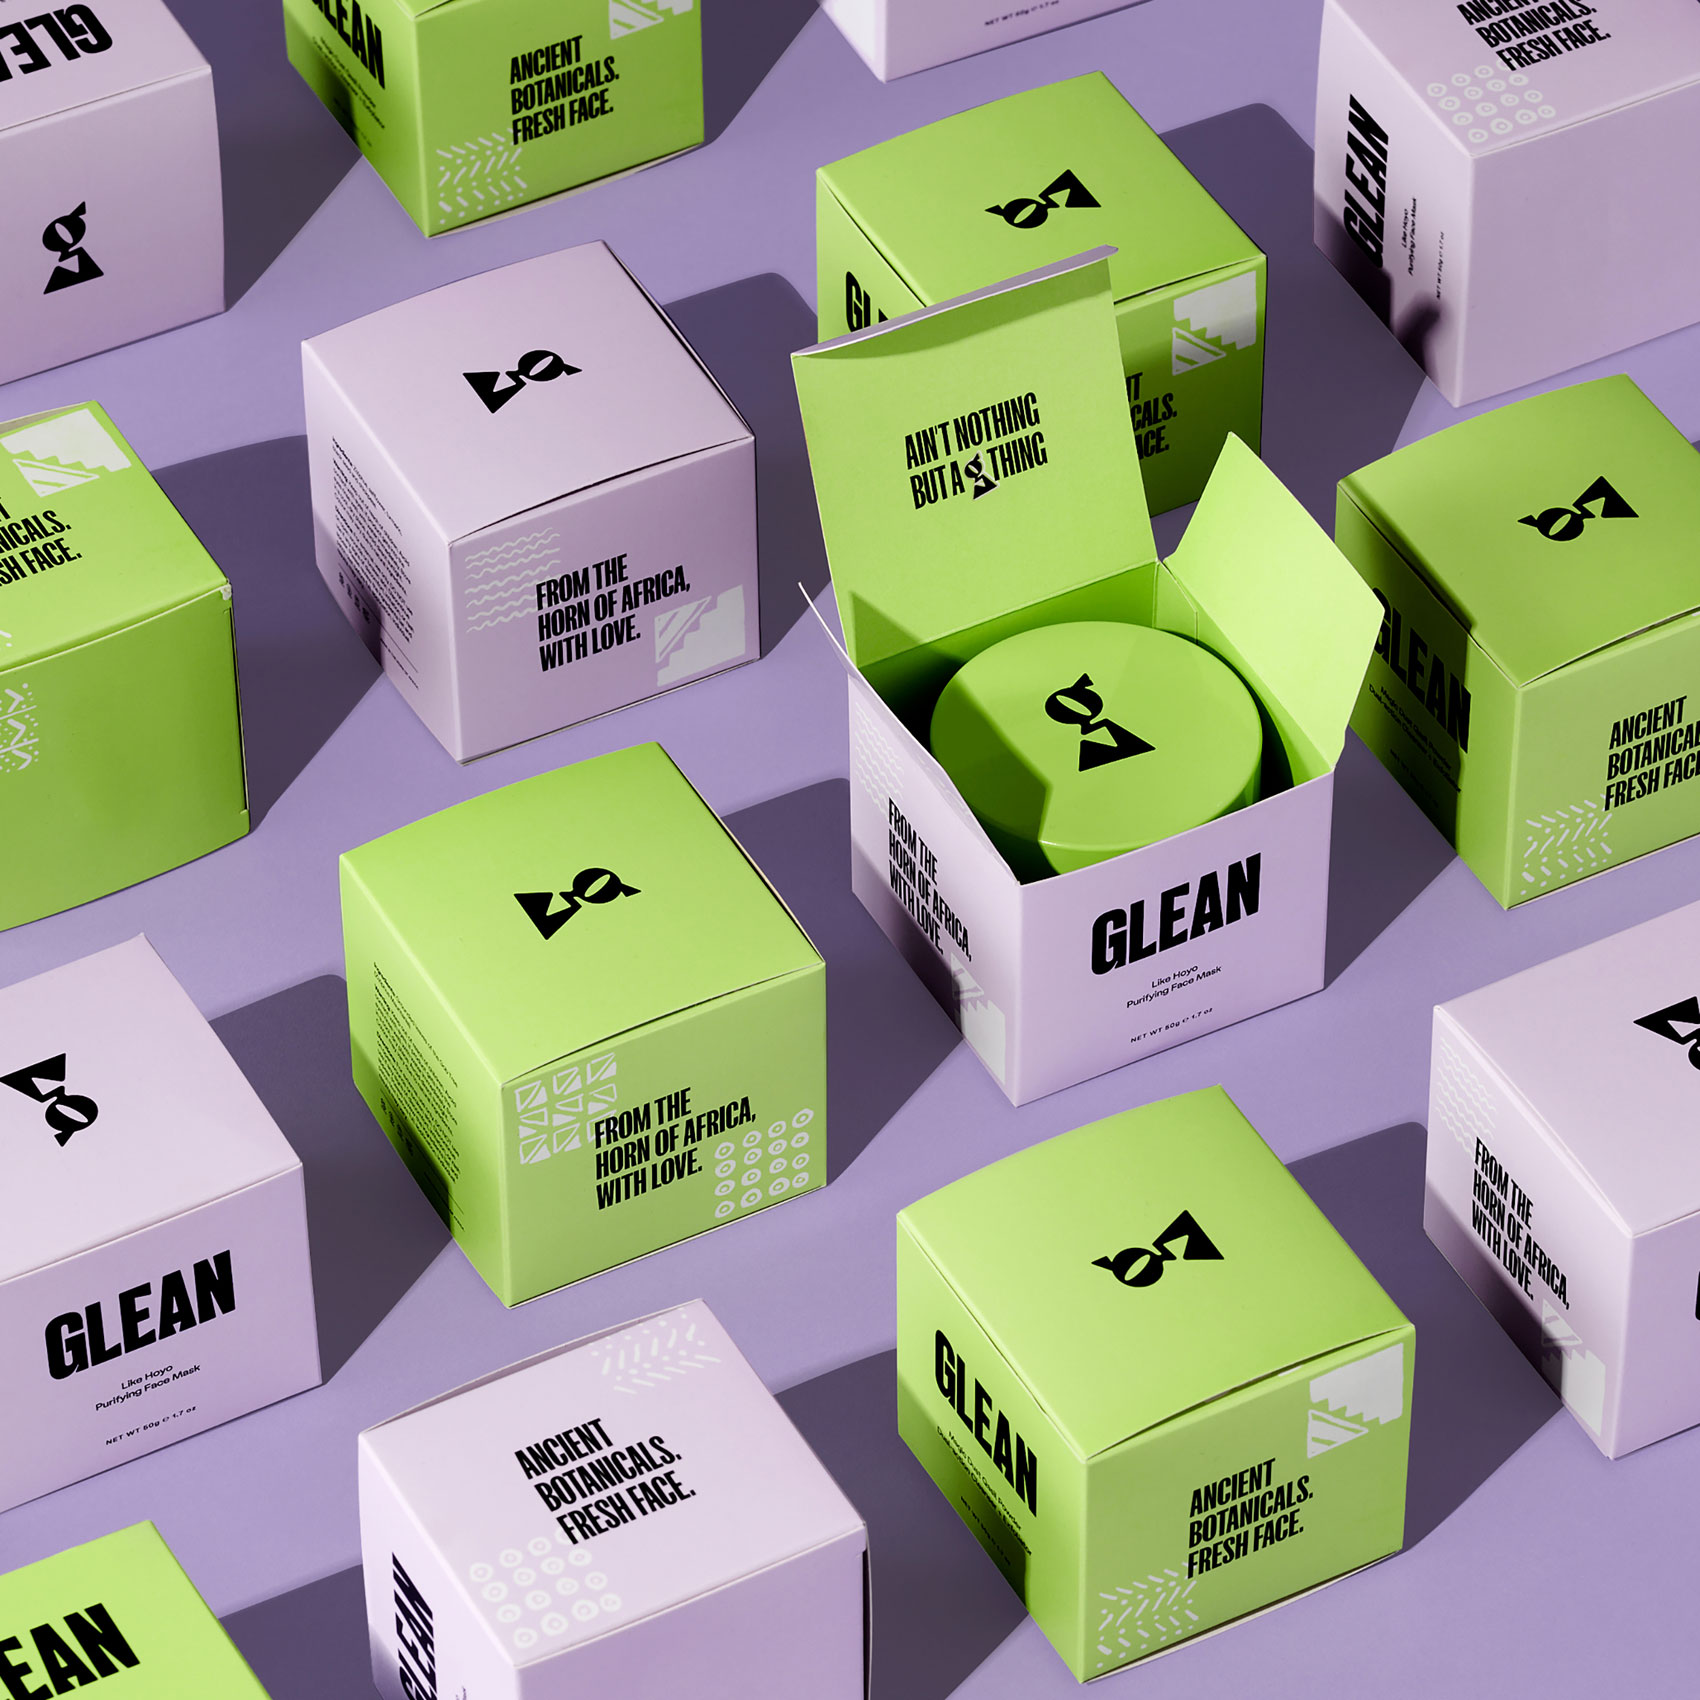 Purple and green skincare product packaging styled neatly in alternating pattern